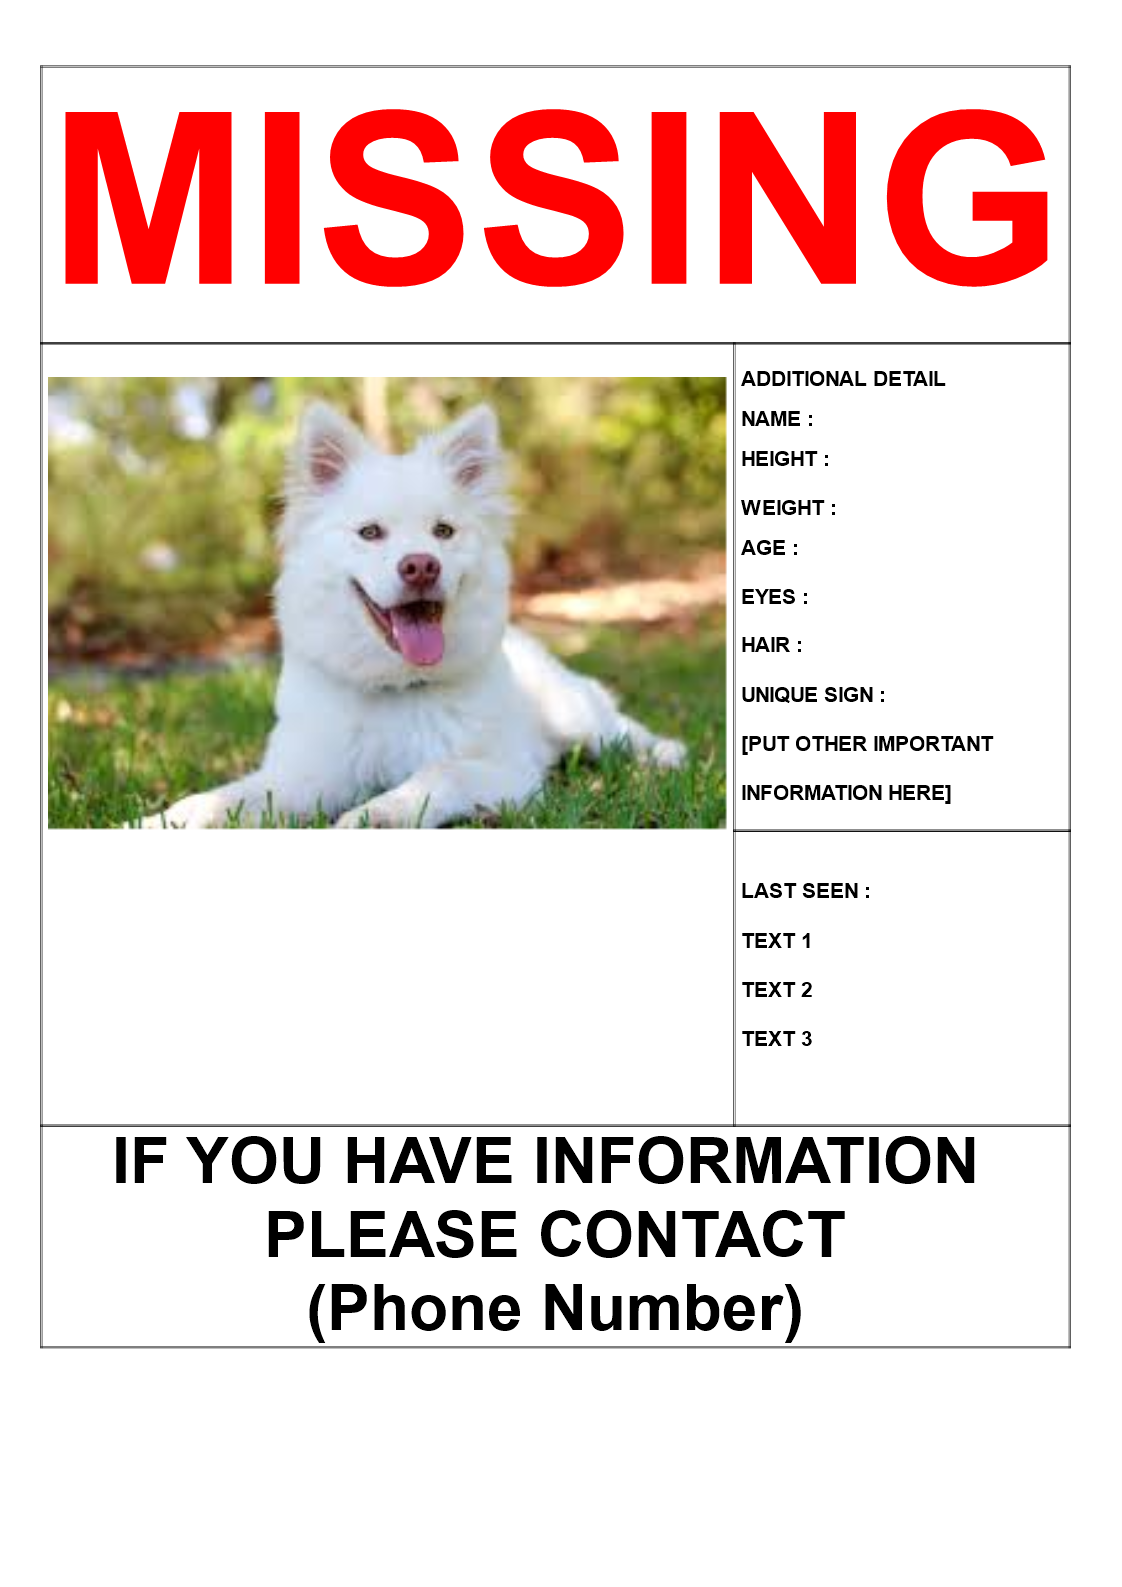 Missing pet poster template | Templates at 